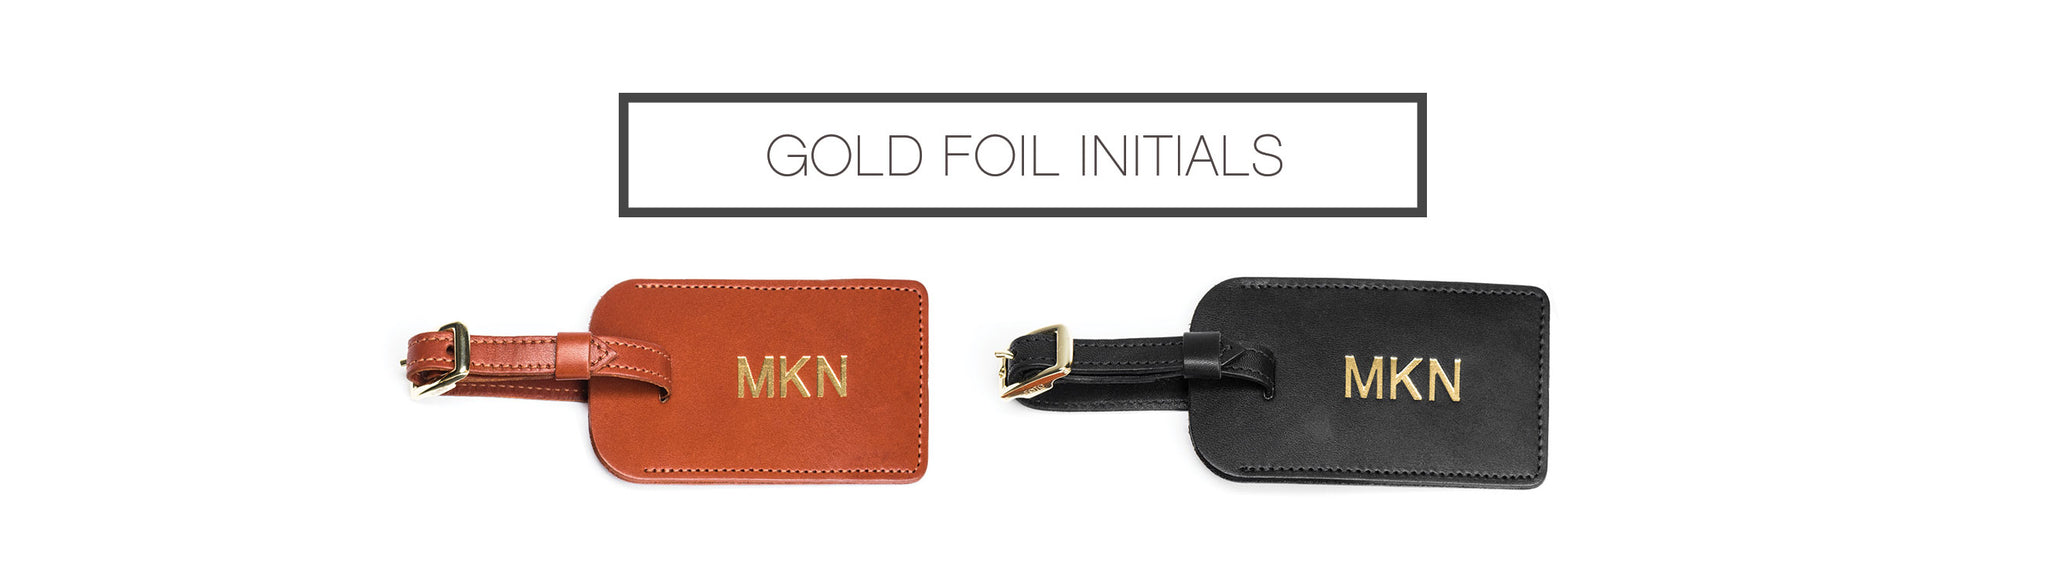 Gold Foil Intials - FOTO Luggage Tag